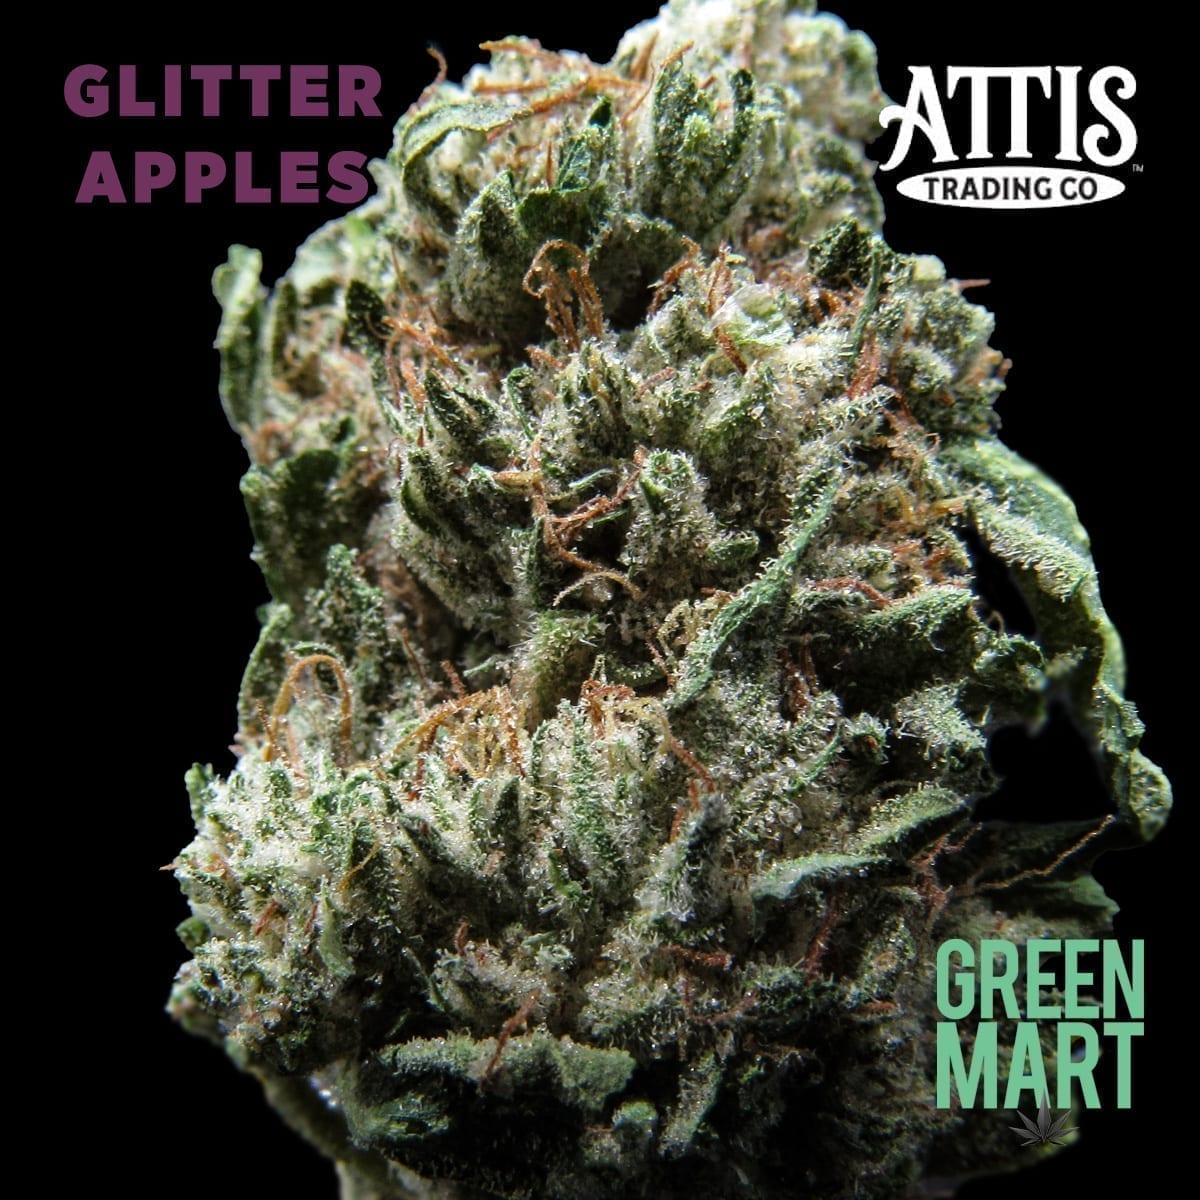 Glitter Apples by Attis Trading Company